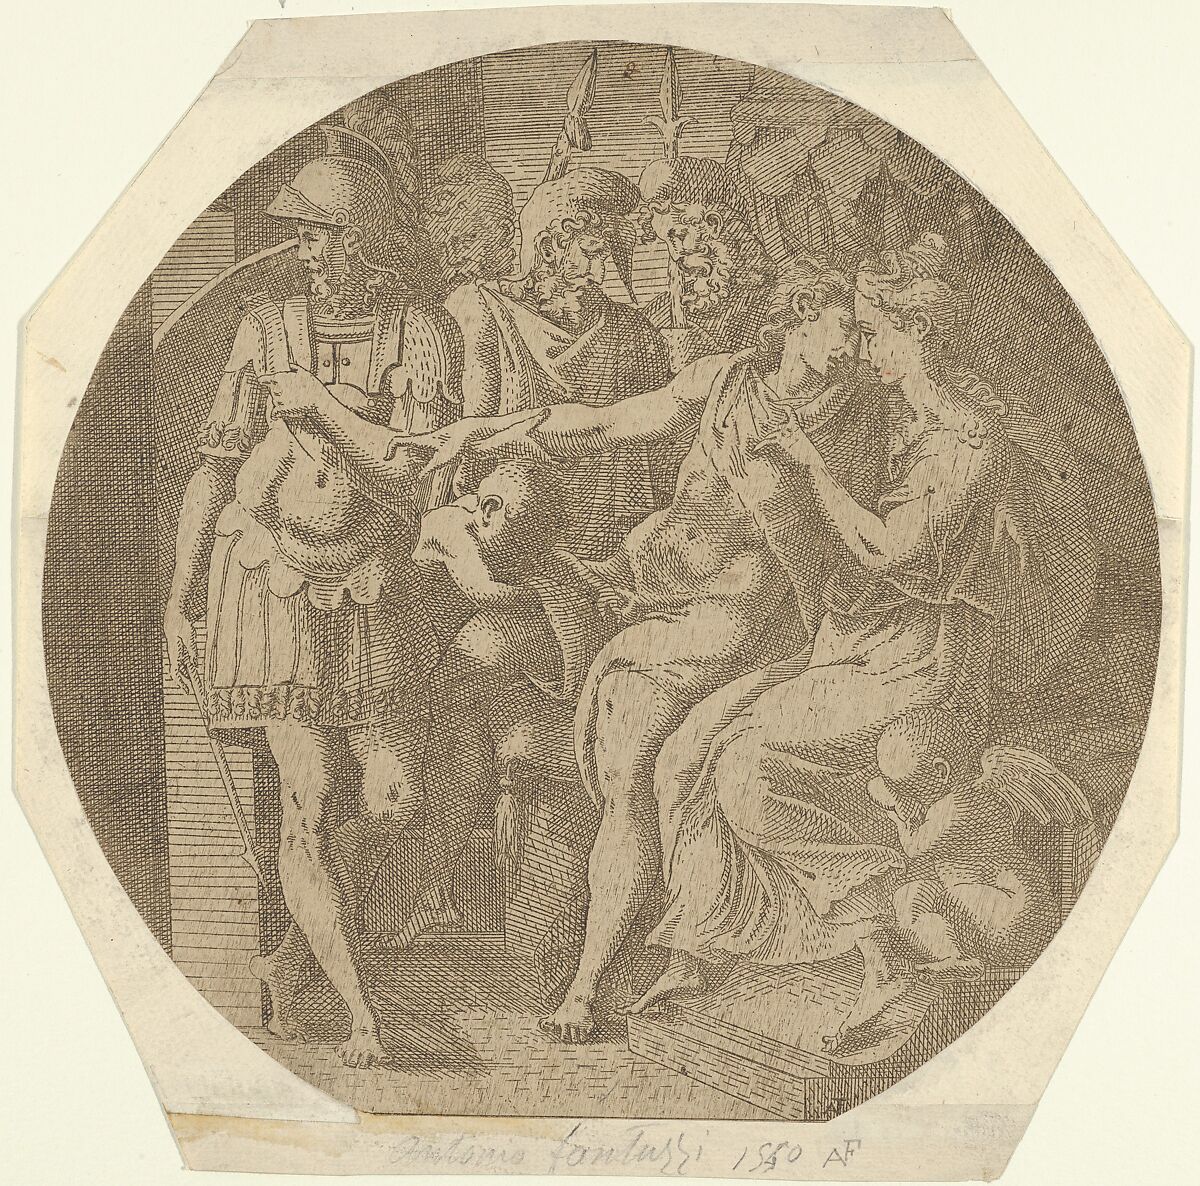 A Man Saying his Farewells to a Woman, Antonio Fantuzzi (Italian, active France, 1537–45), Etching 